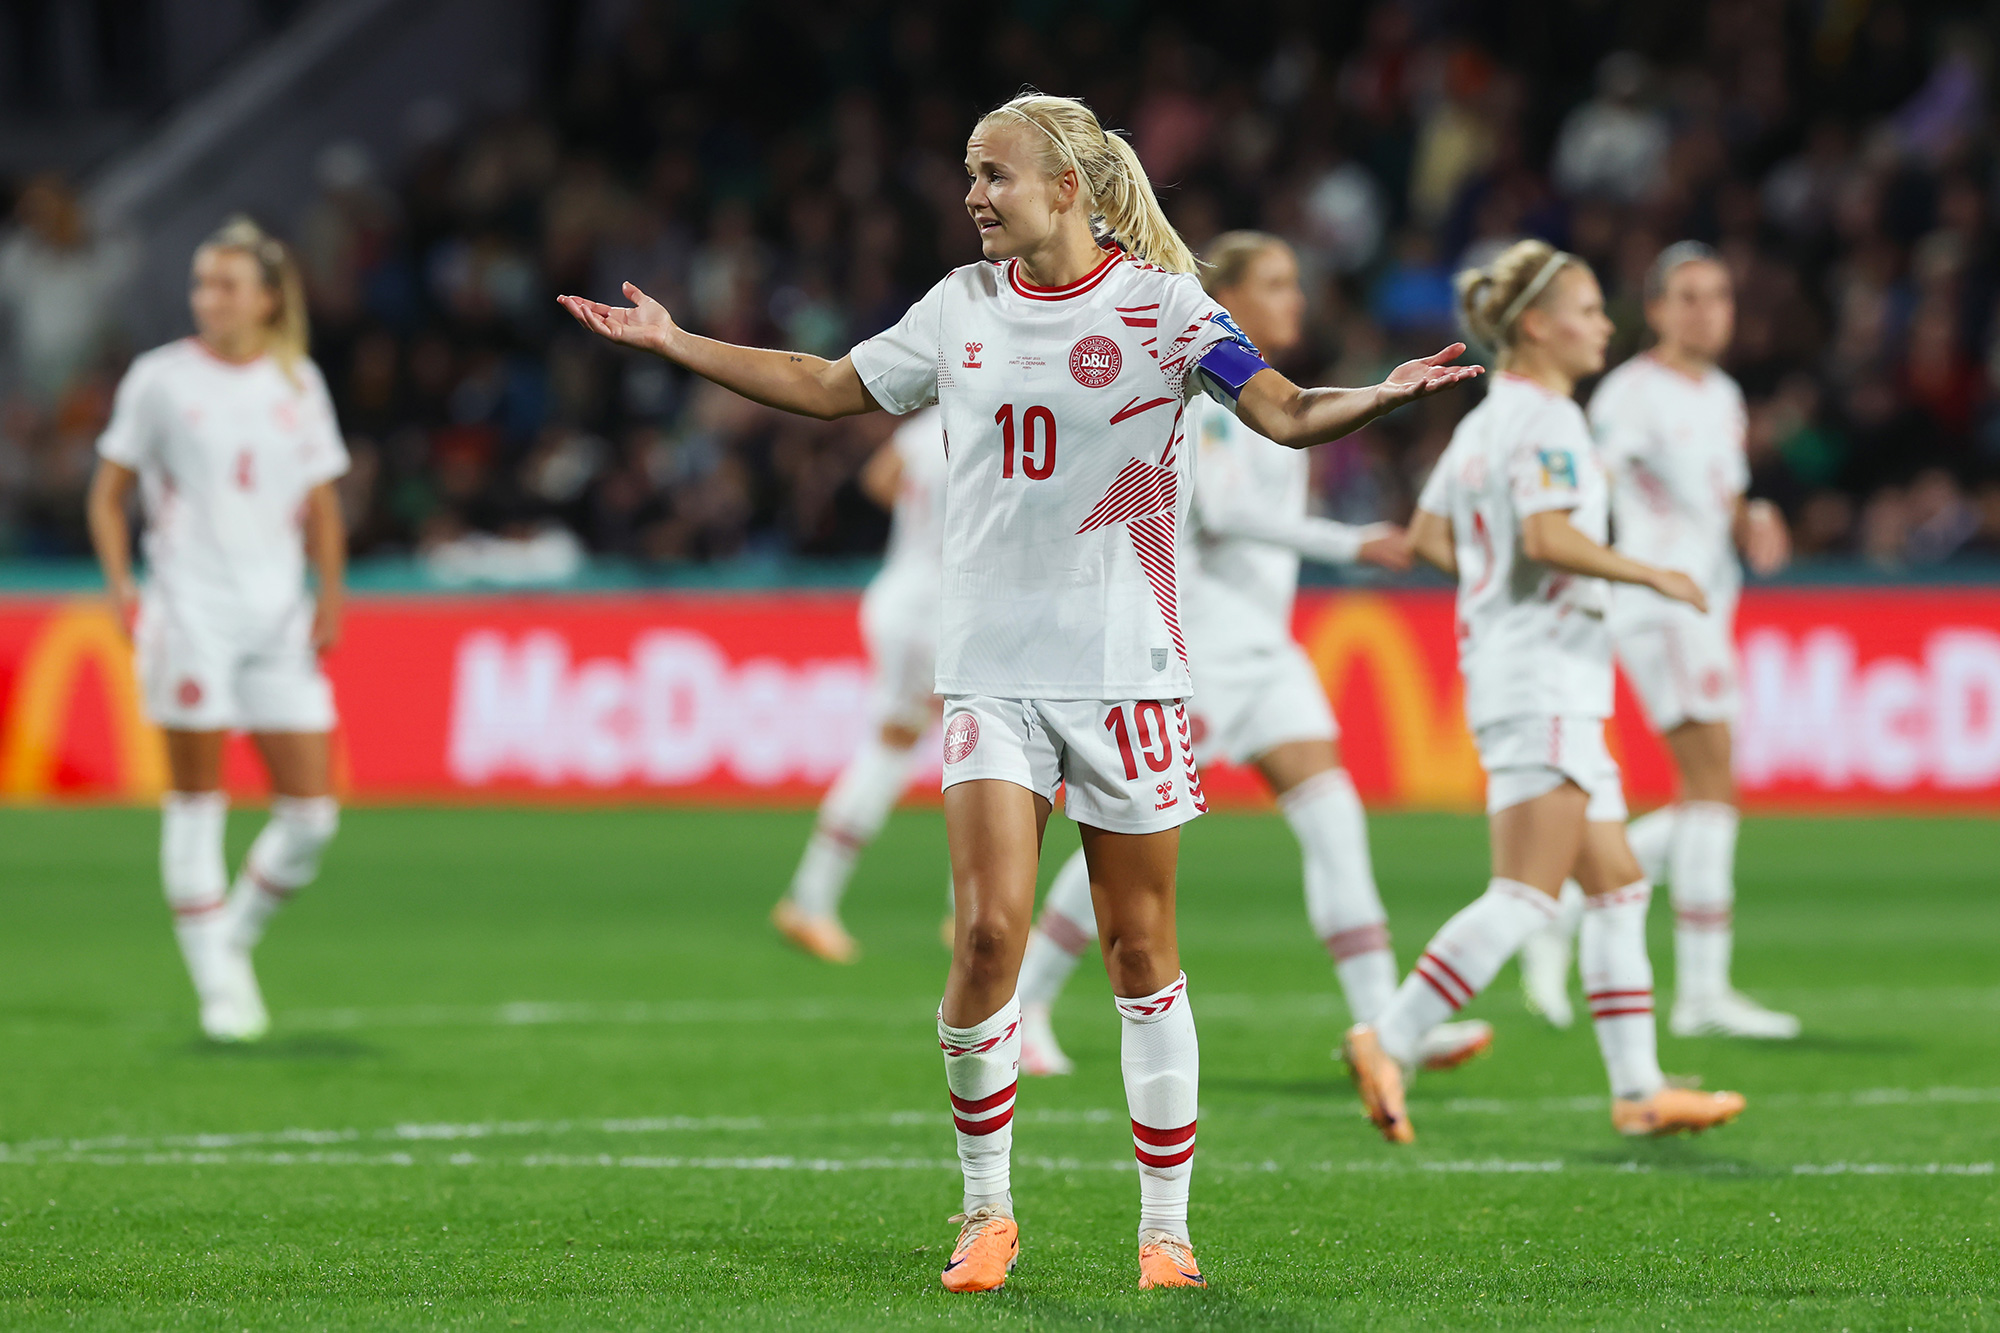 Pernille Harder of Denmark reacts after her goal is disallowed after the Video Assistant Referee review.